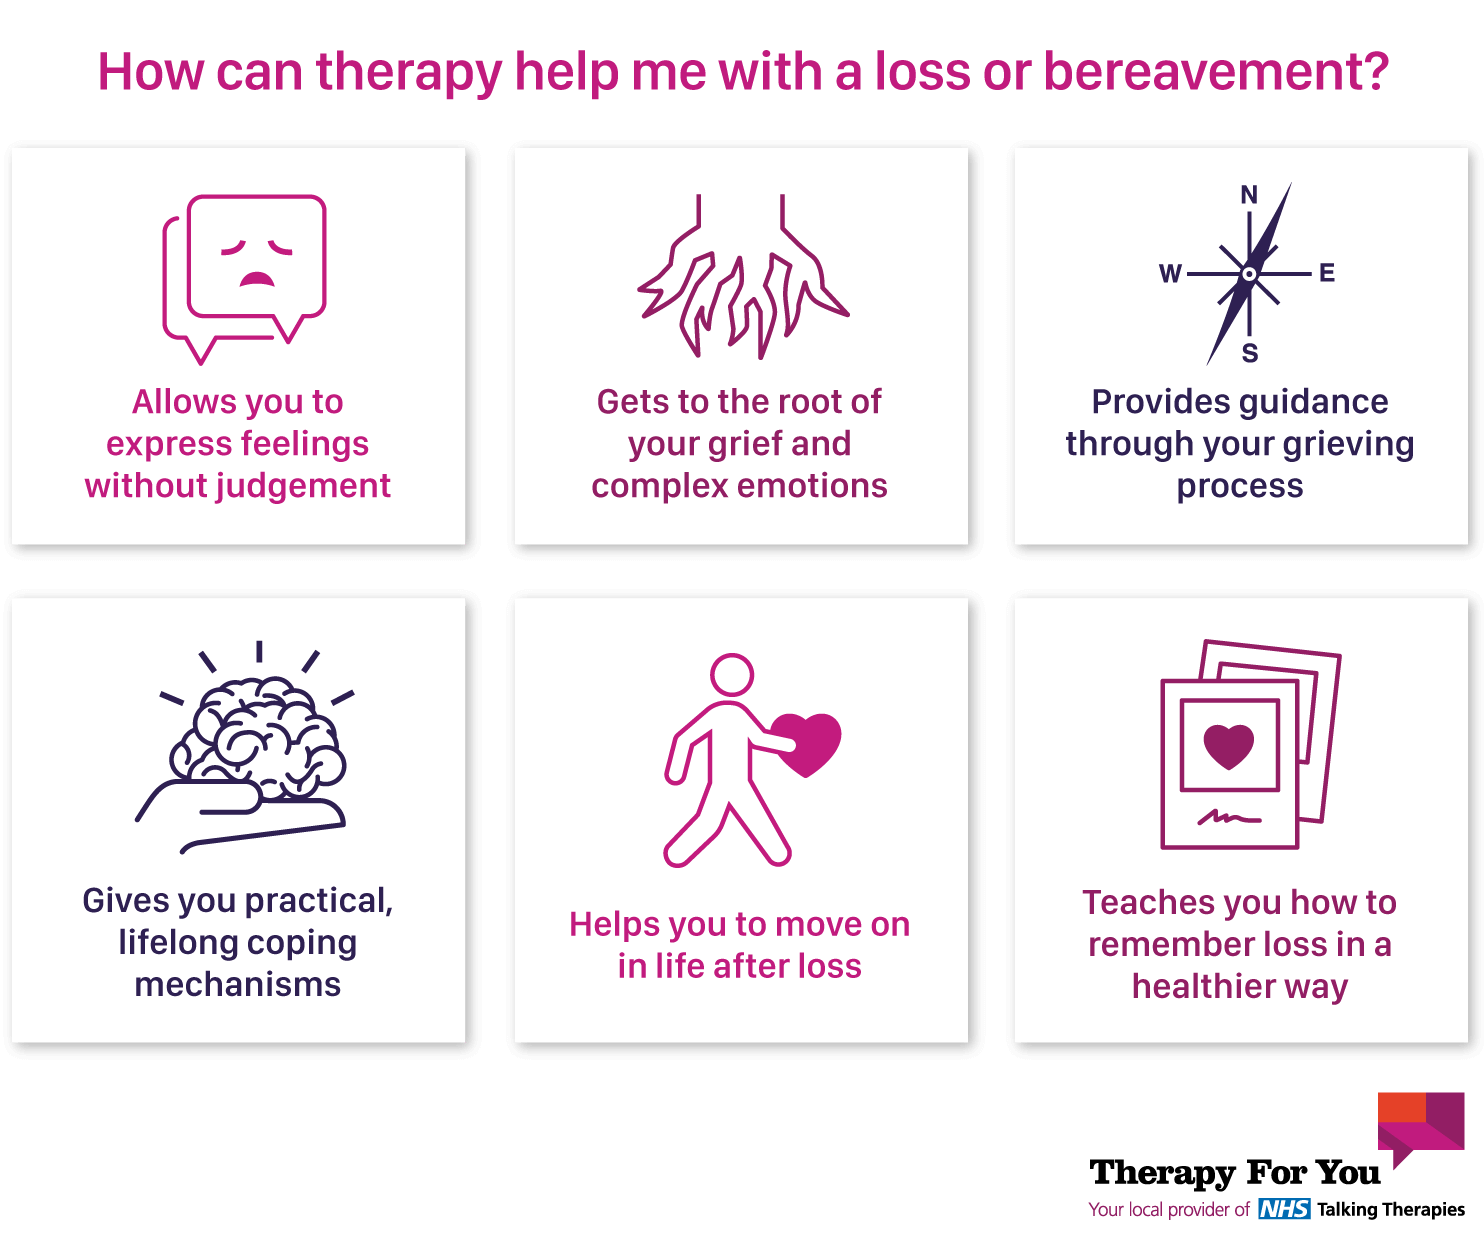 How can therapy help me with a loss or bereavement?